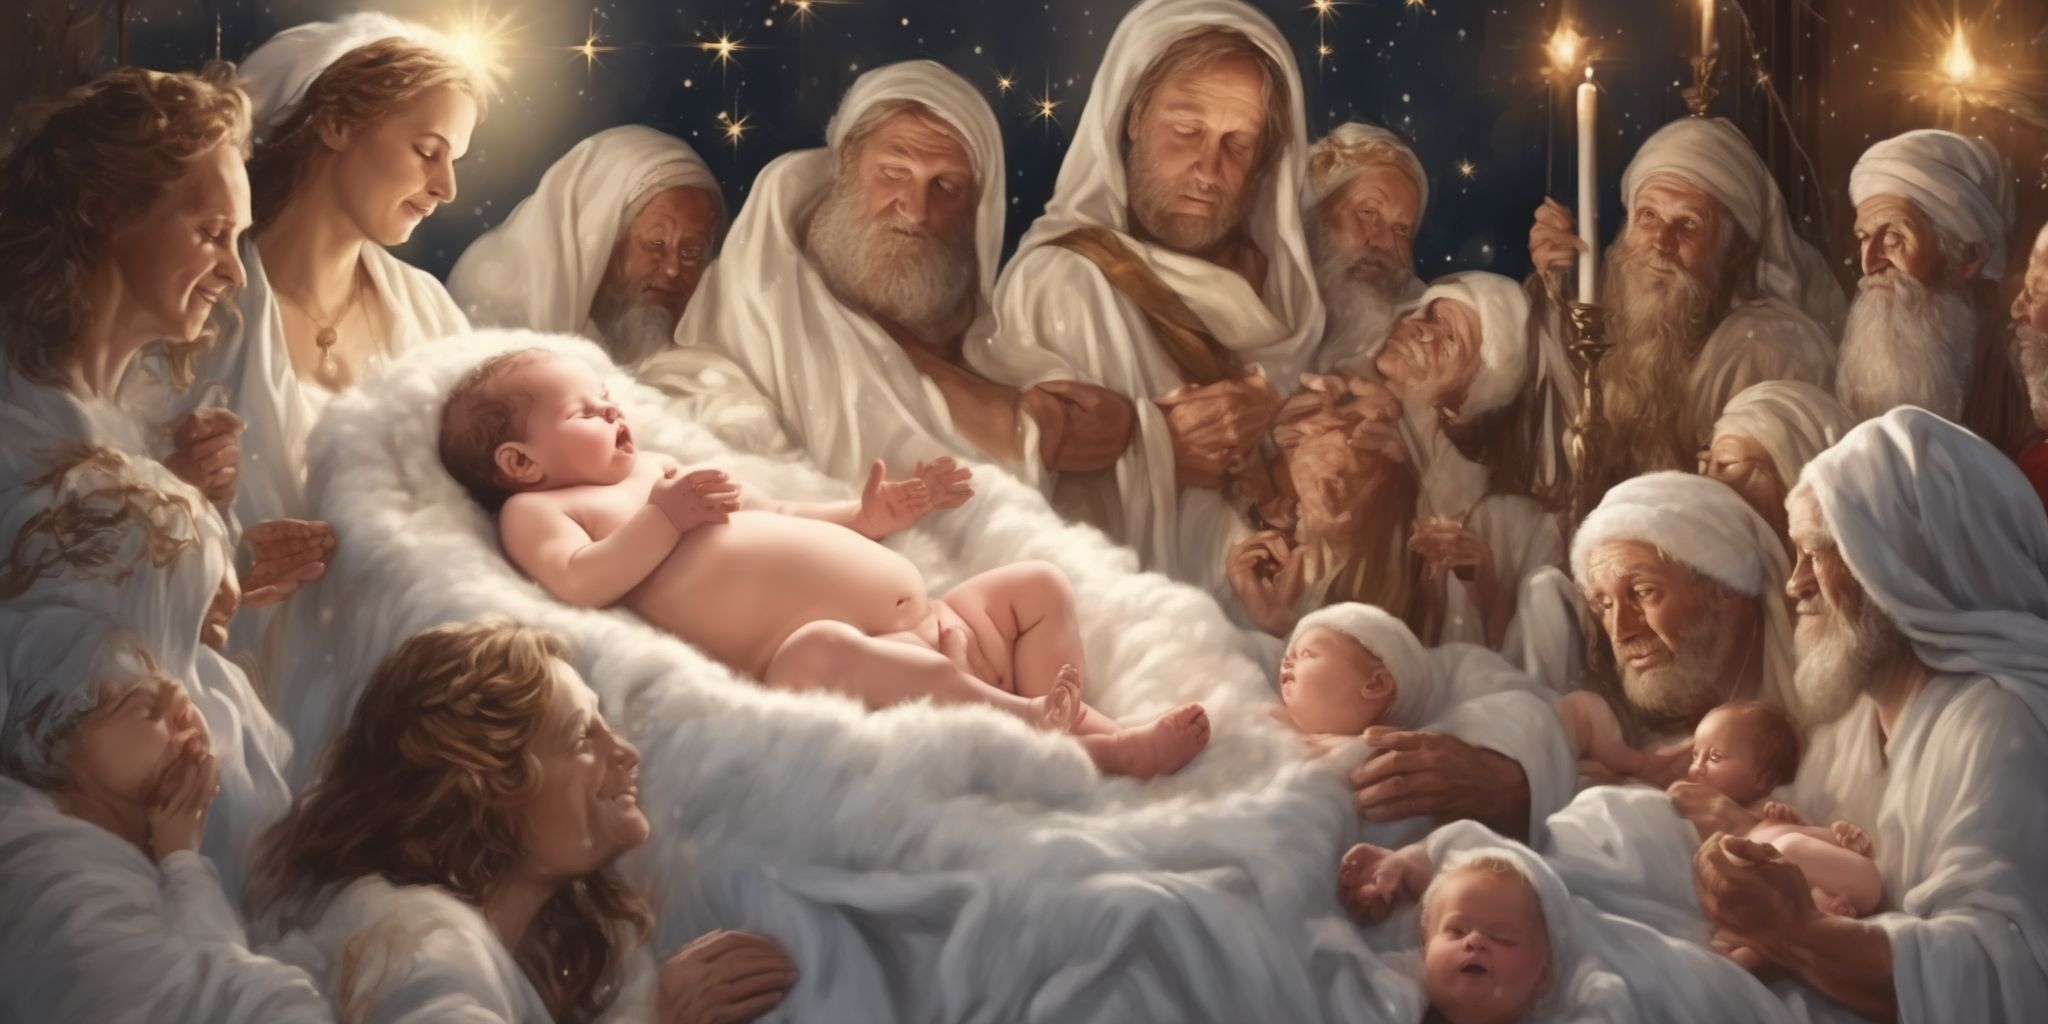 Divine birth in realistic Christmas style